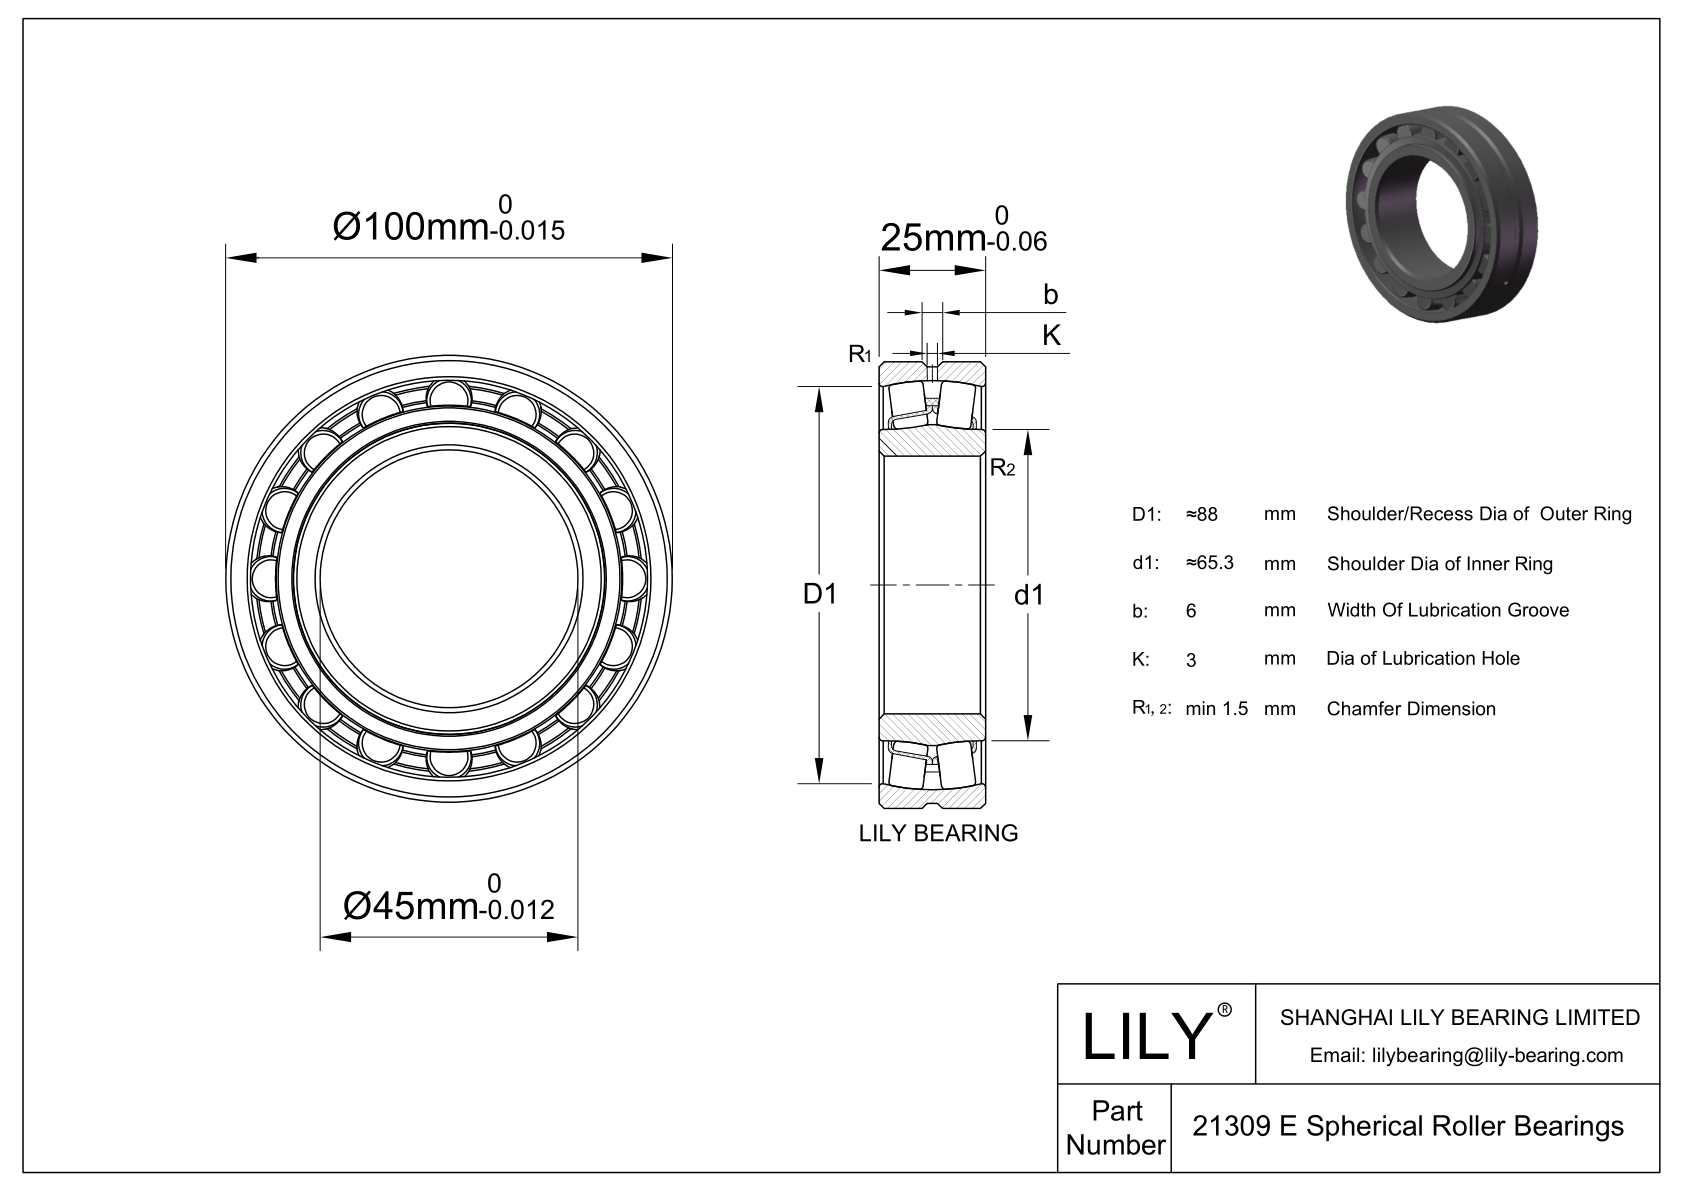 21309 E Double Row Spherical Roller Bearing cad drawing